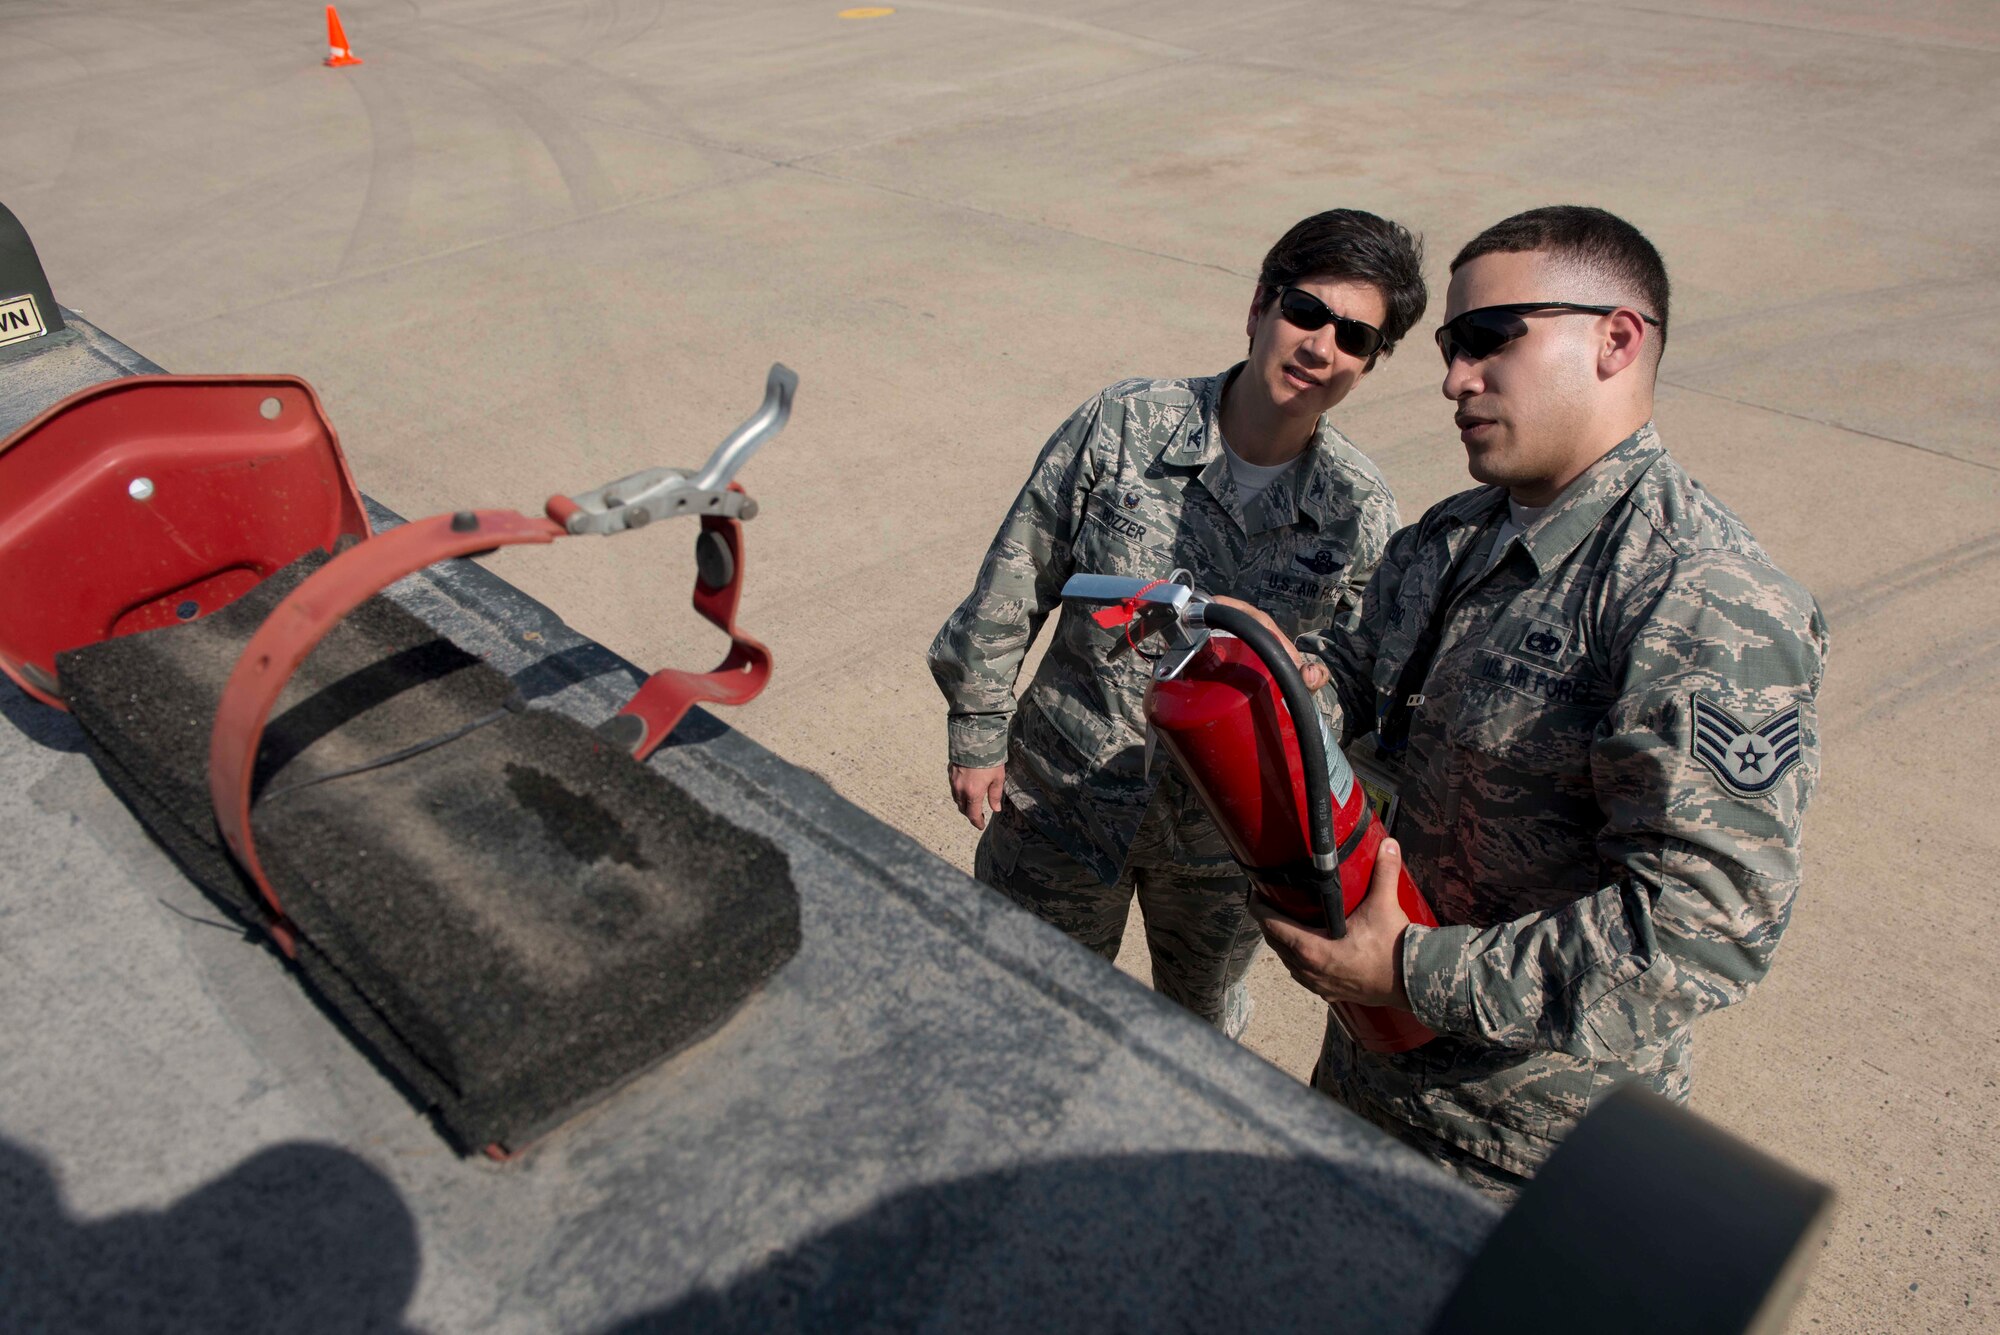 U.S. Air Force Staff Sgt. Michael Salcedo, 728th Air Mobility Squadron crew chief, inspects a fire extinguisher with U.S. Air Force Col. Nancy Bozzer, 521st Air Mobility Operations Wing commander, April 5, 2016, at Incirlik Air Base, Turkey. Inspecting the fire extinguisher was part of a pre-vehicle operations walkthrough check. (U.S. Air Force photo by Senior Airman John Nieves Camacho/Released)